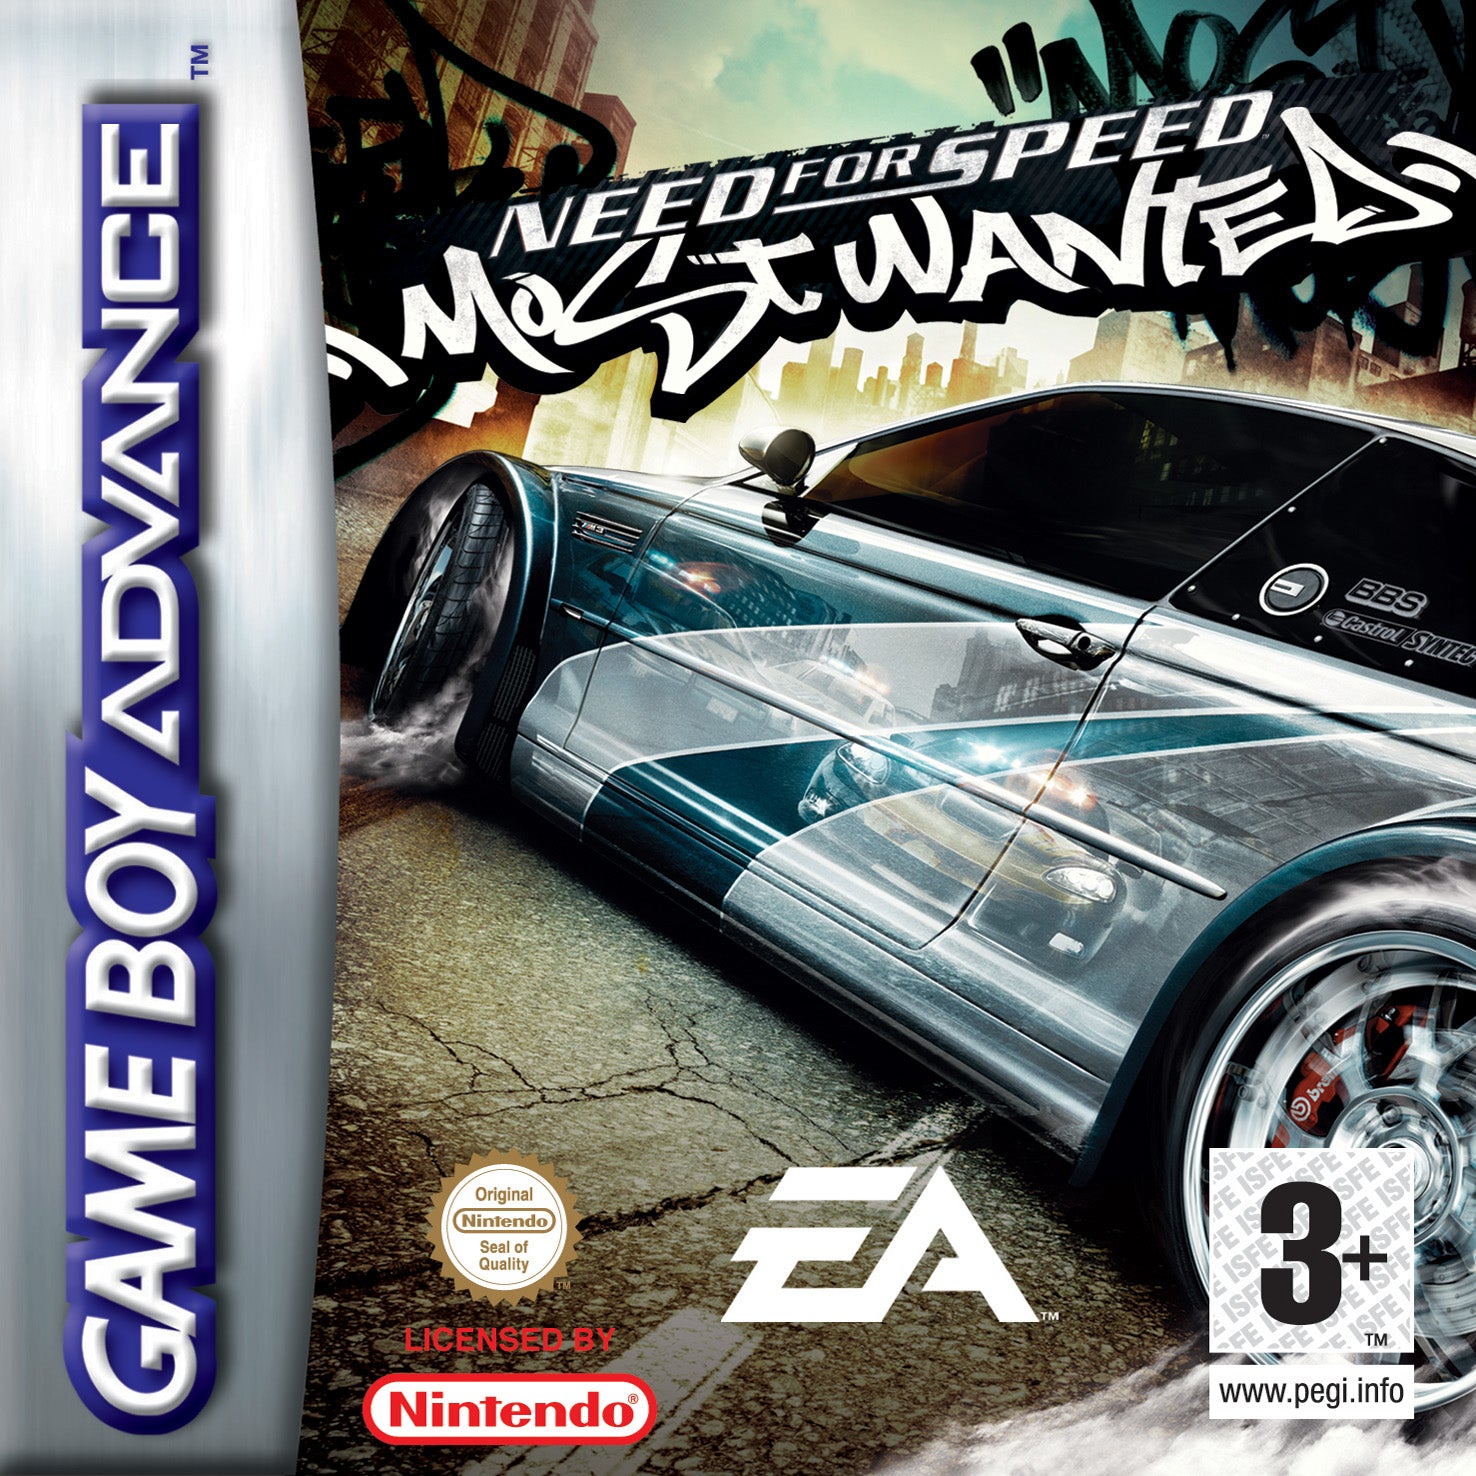 Game | Nintendo Gameboy  Advance GBA | Need For Speed: Most Wanted